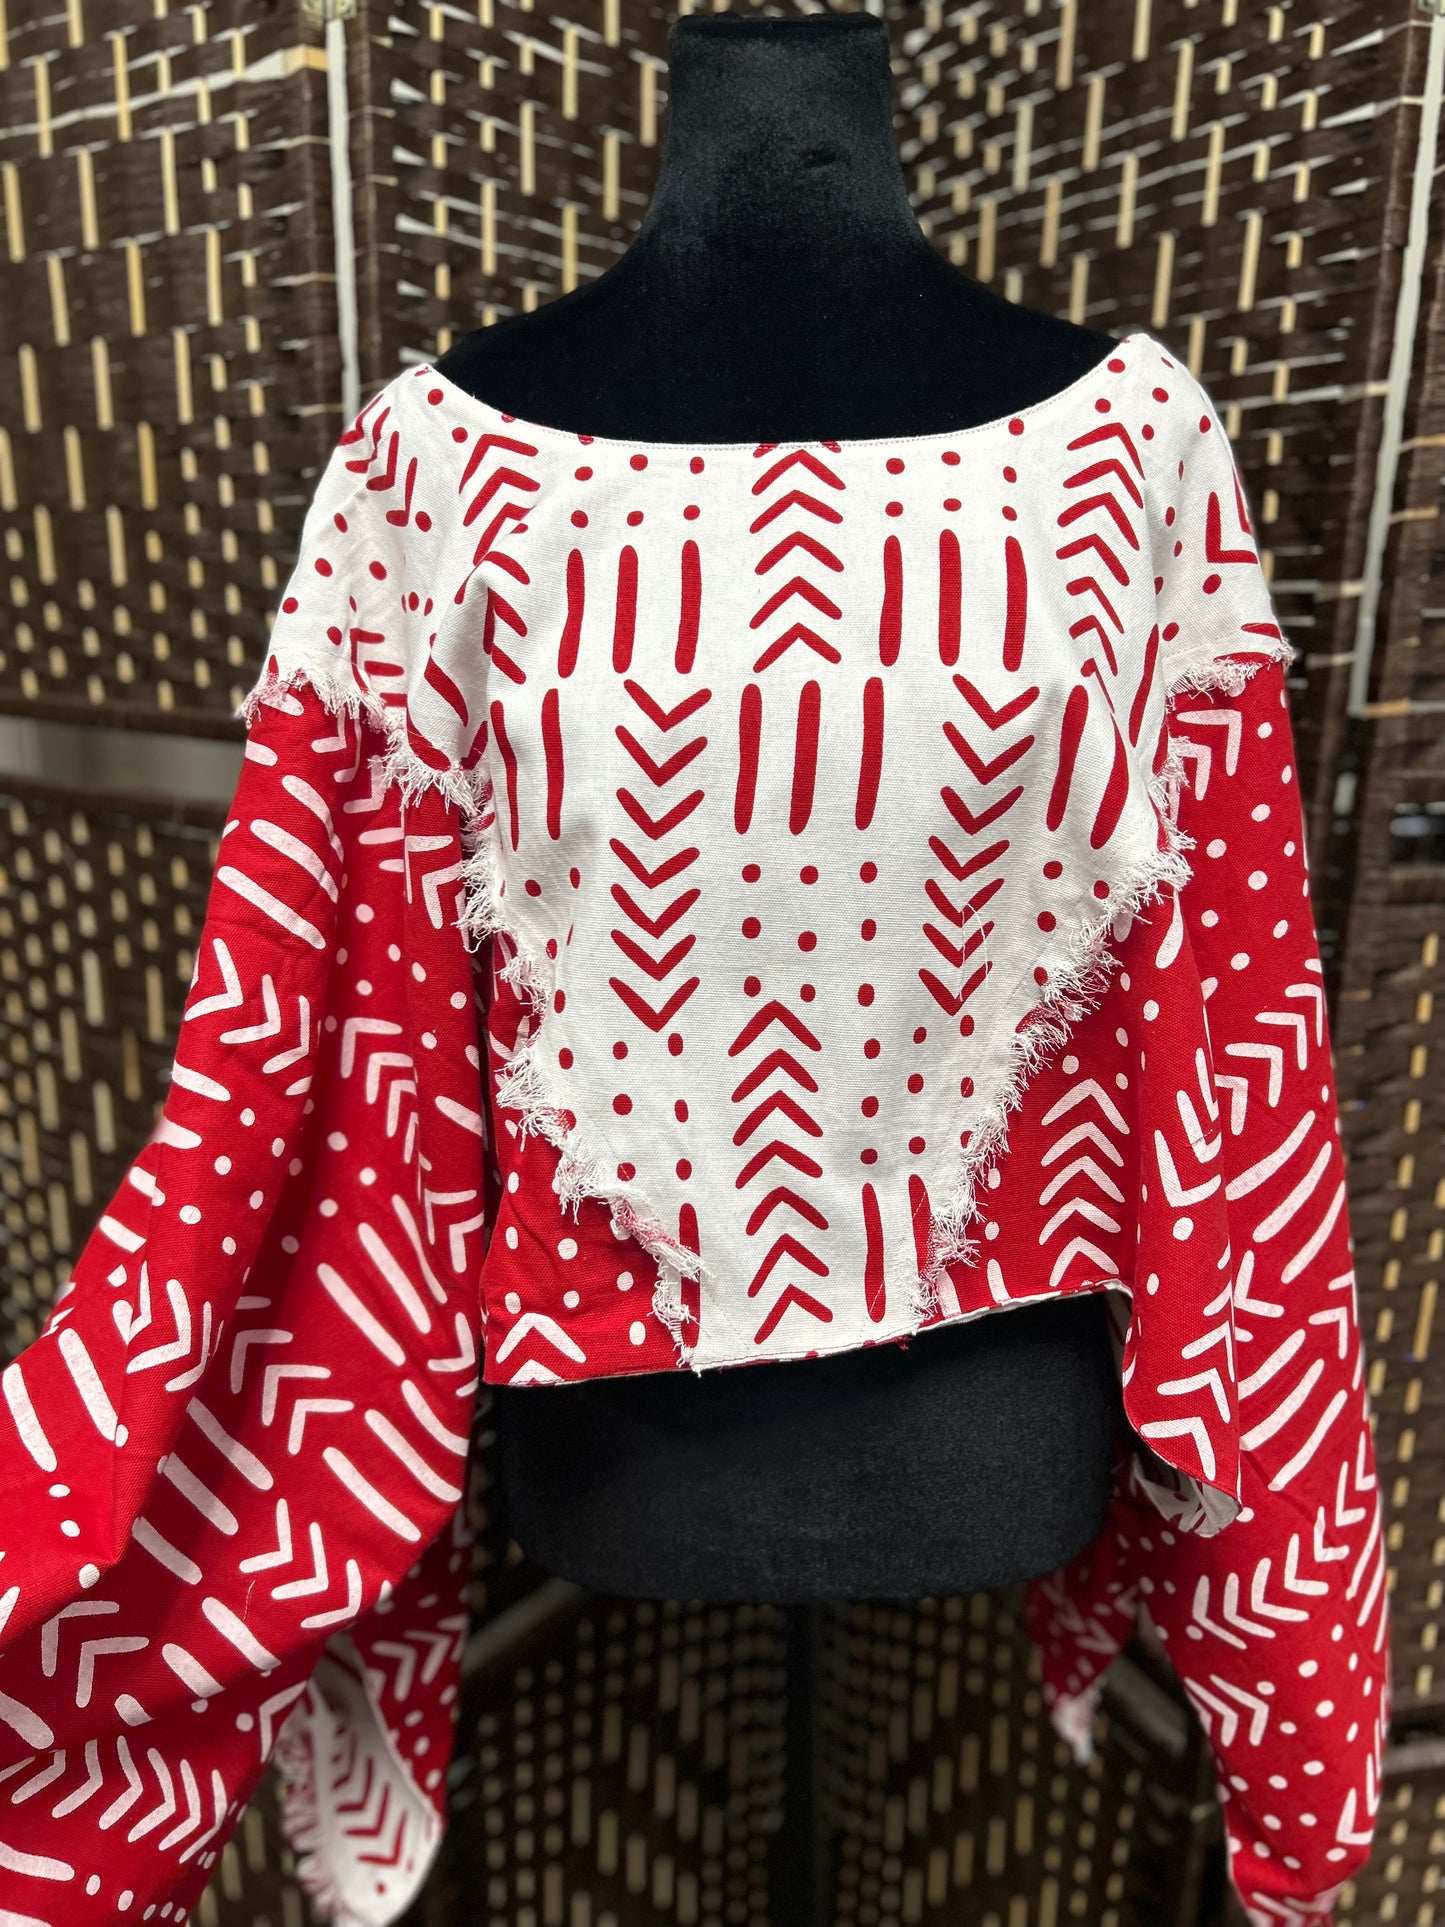 Red and White Reversible Short Crop Jacket